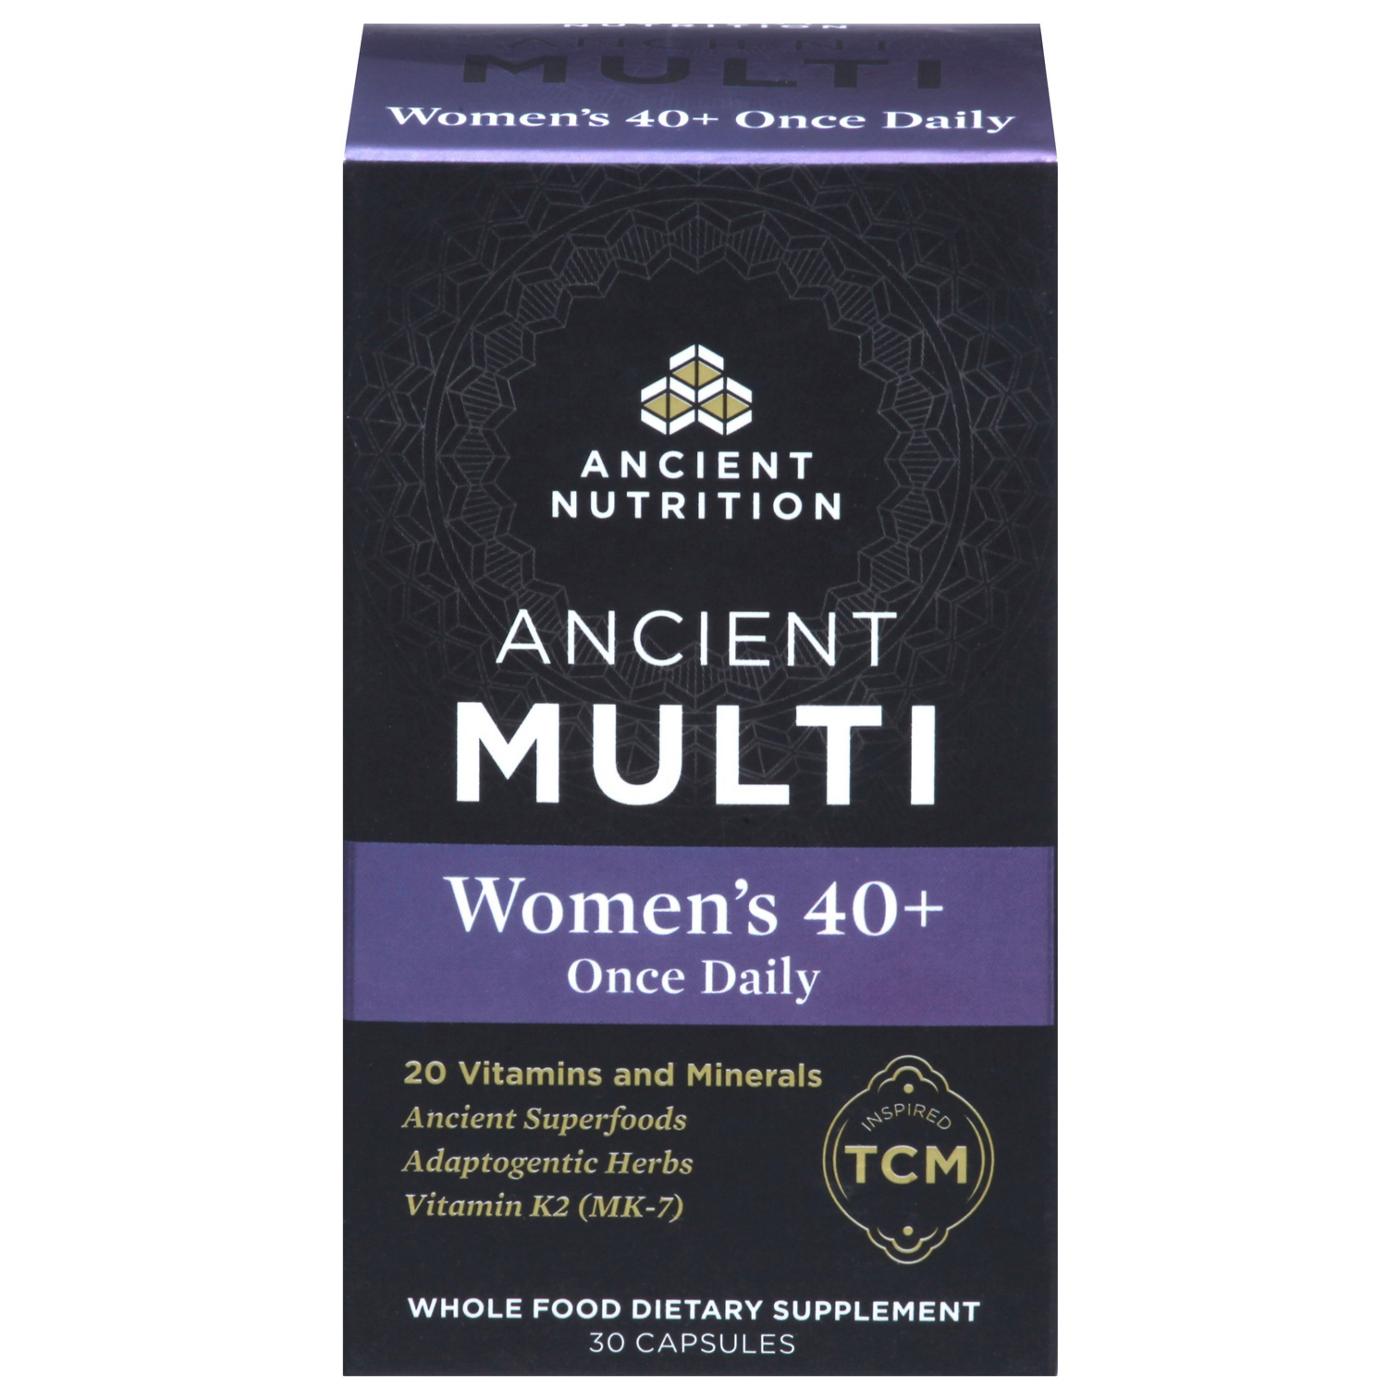 Ancient Nutrition Women's 40+ Once Daily Capsules; image 1 of 2